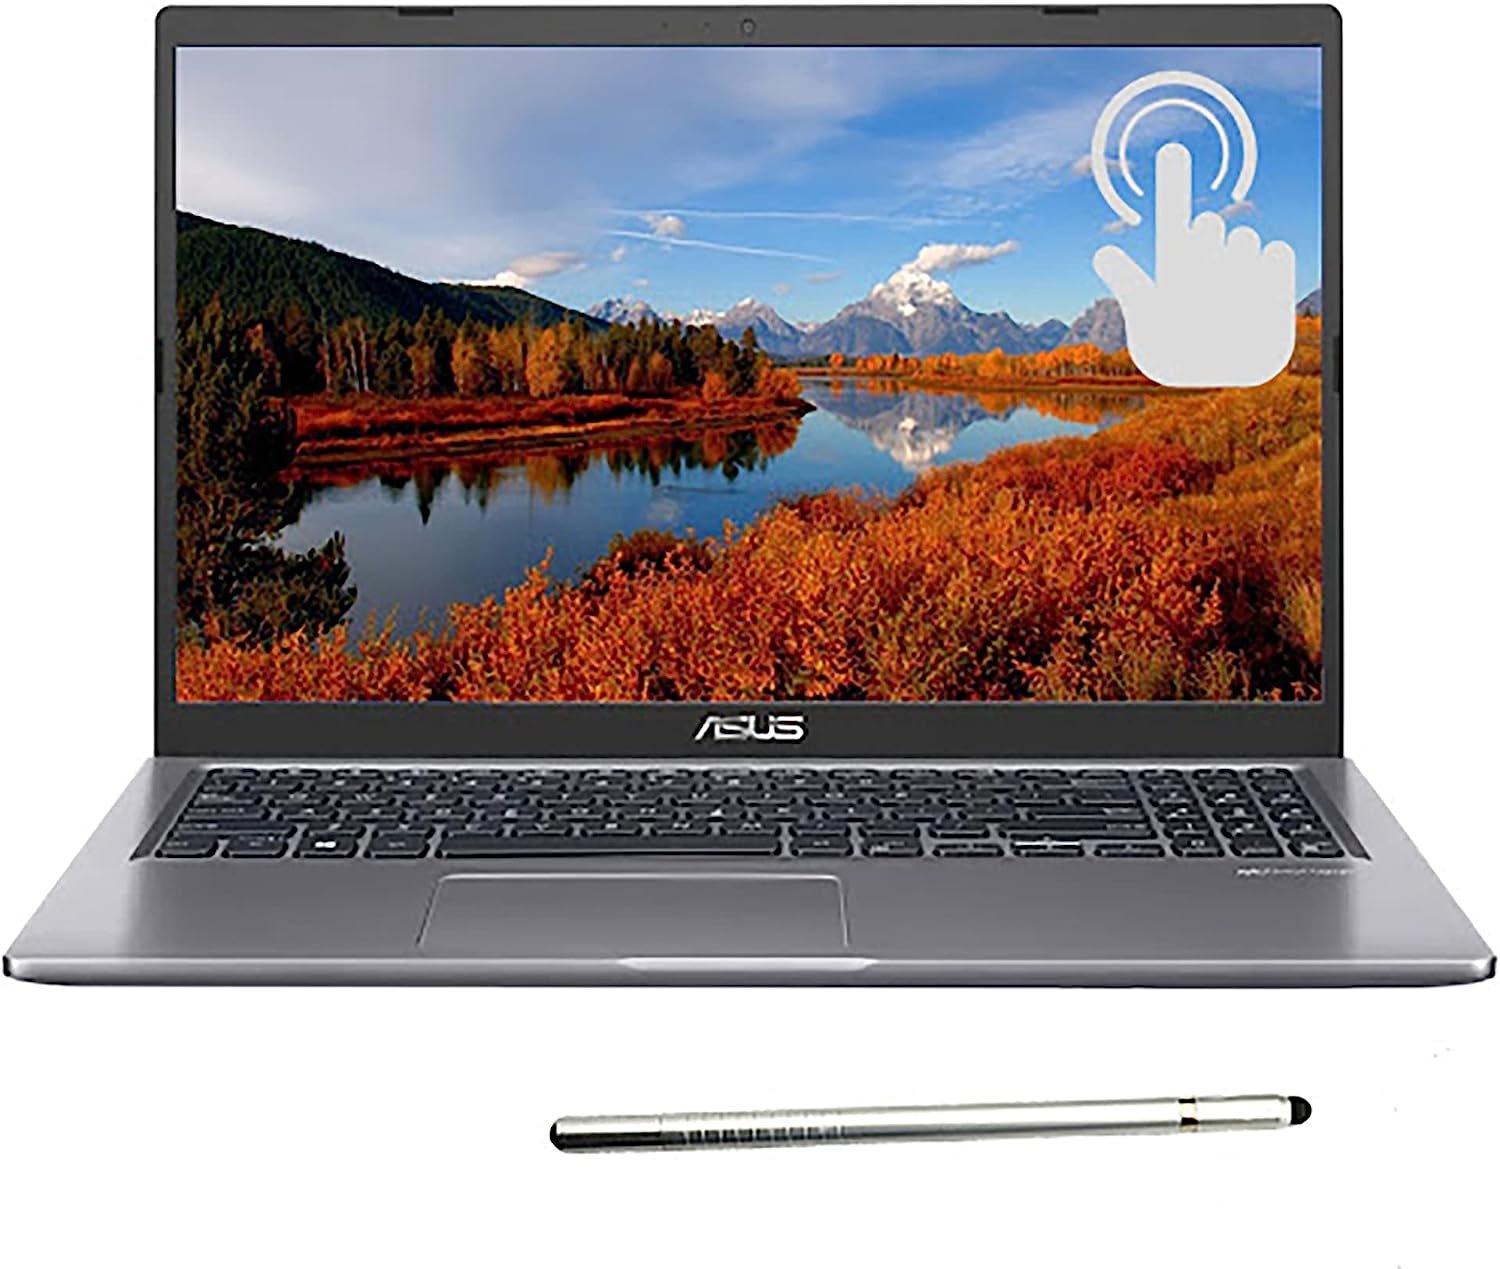 ASUS VivoBook 15.6'' Touchscreen Thin and Light Laptop